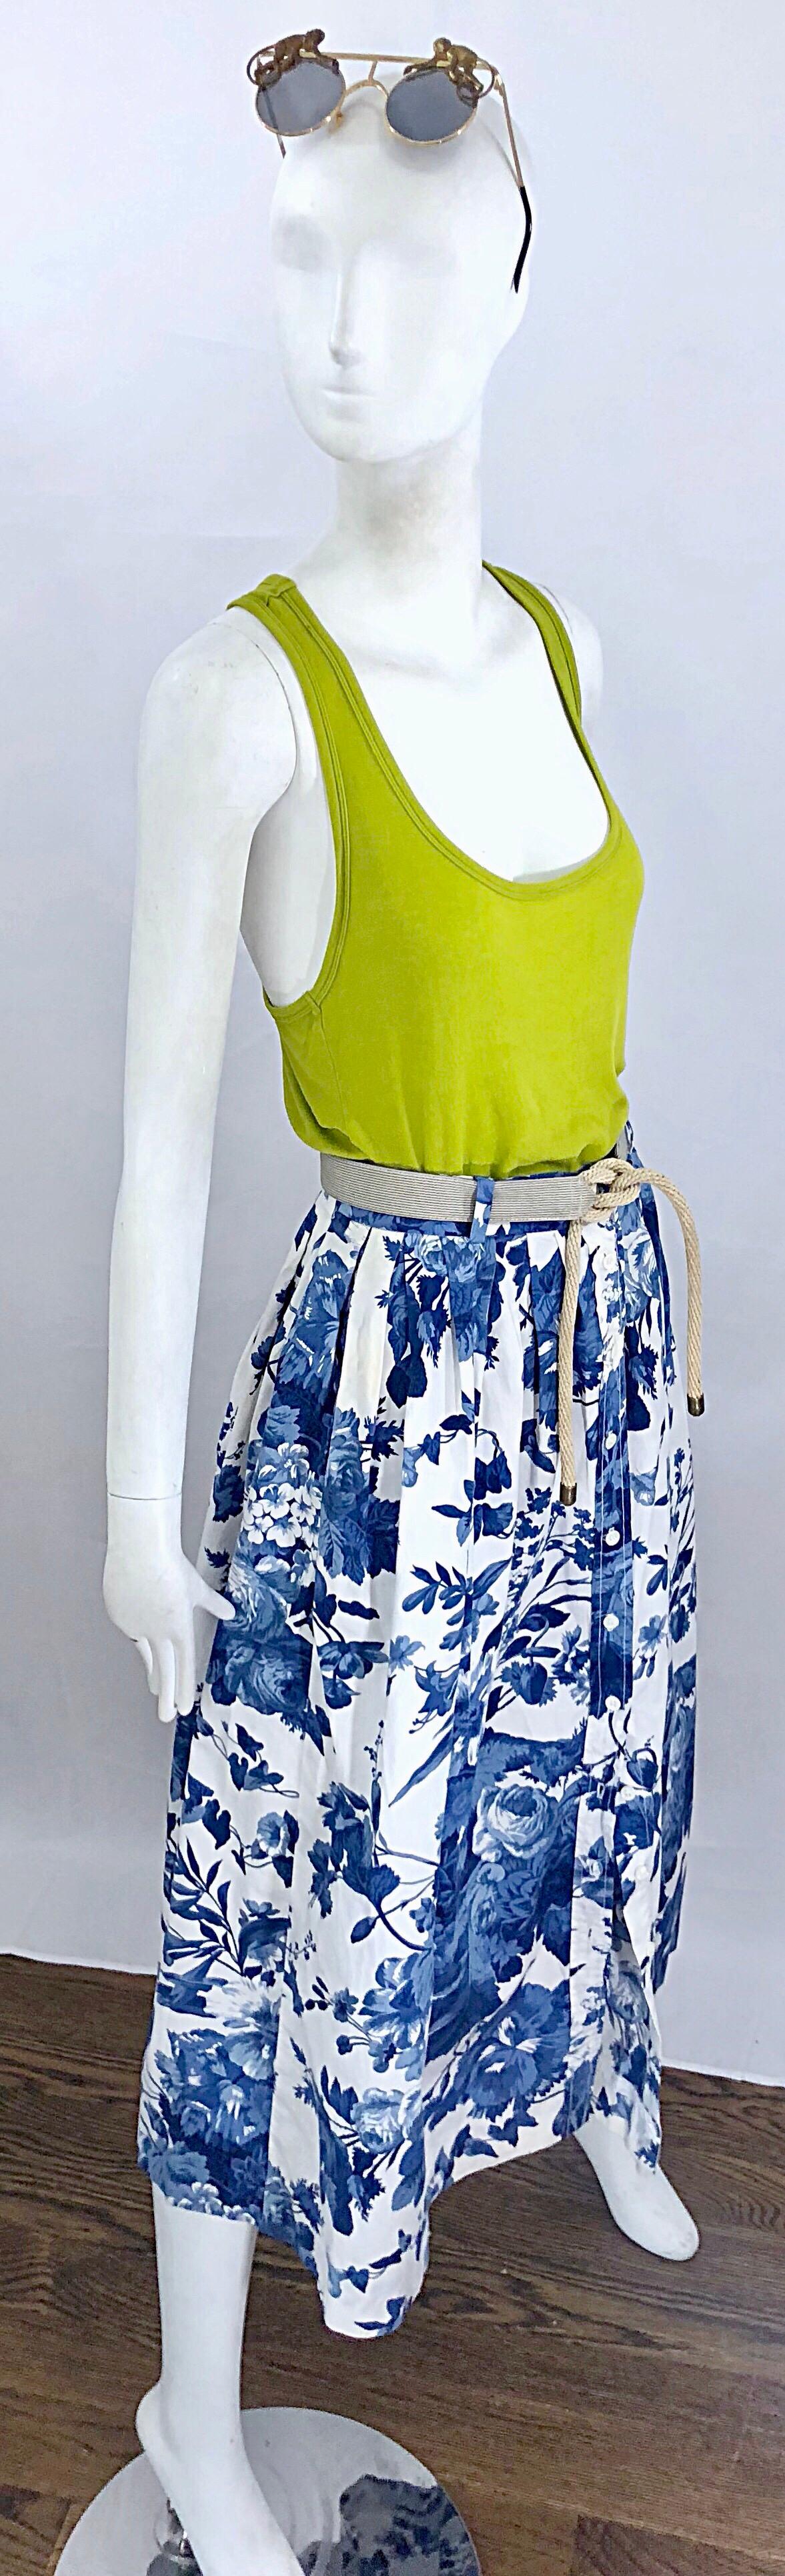 Vintage Ralph Lauren 1990s Blue + White Floral Print 90s Cotton Midi Skirt In Excellent Condition For Sale In San Diego, CA